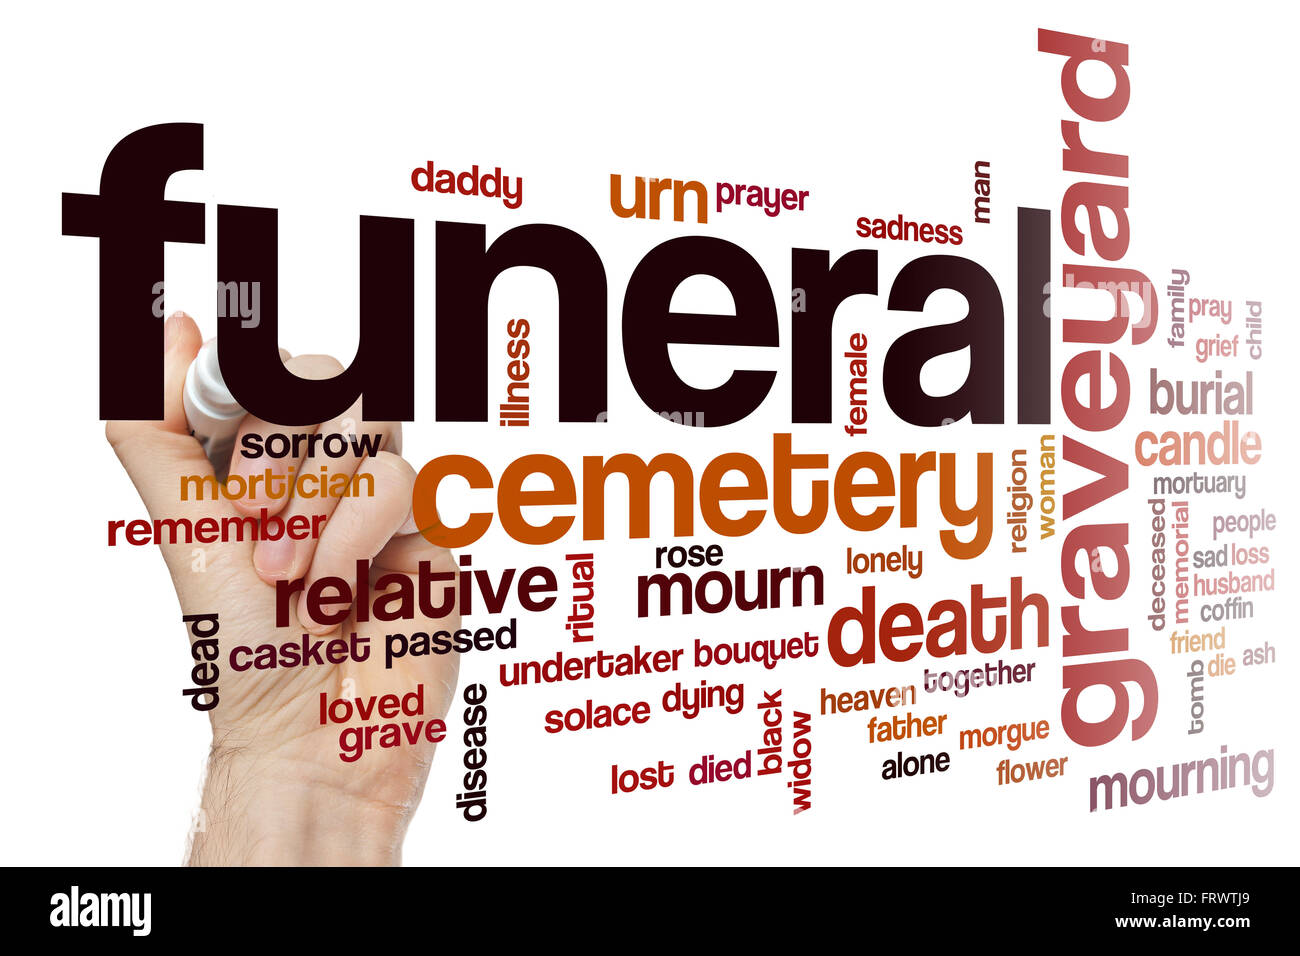 Funeral word cloud concept Stock Photo